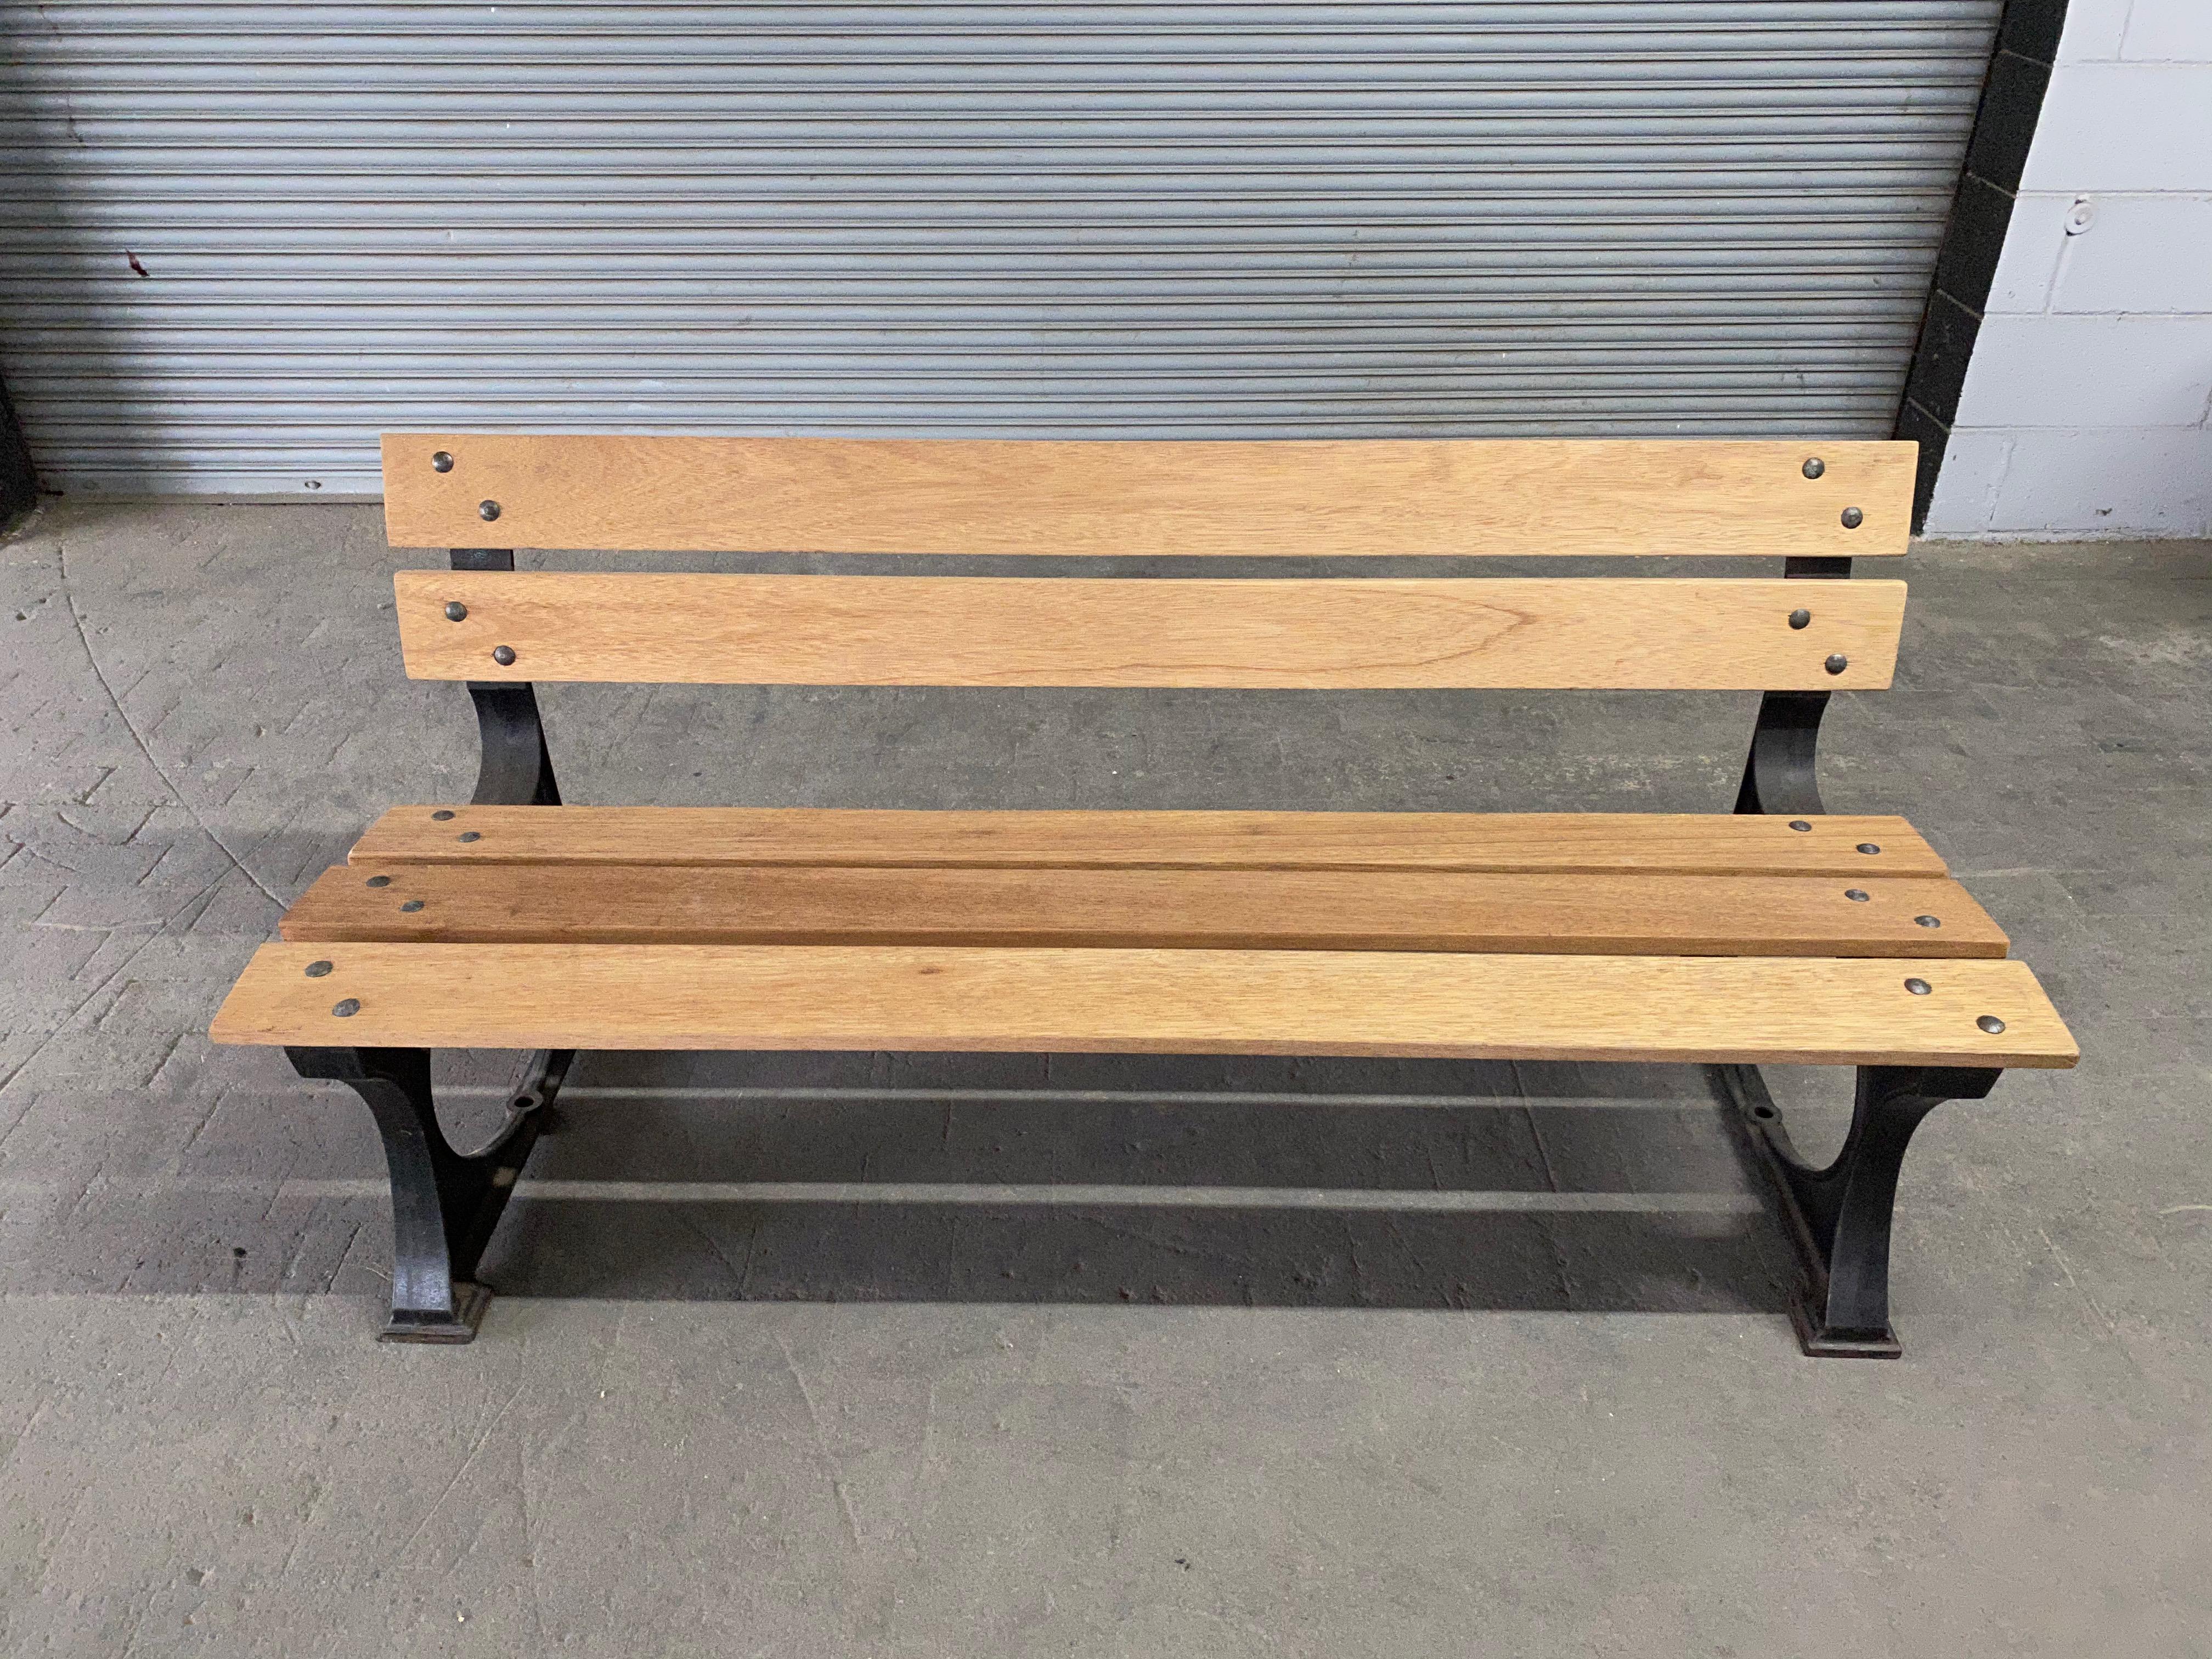 French Art Deco period garden bench with cast iron base. New mahogany wood slats have been added and finished with a light natural color stain. The seats and back will age very nicely with time and outdoor exposure.

 